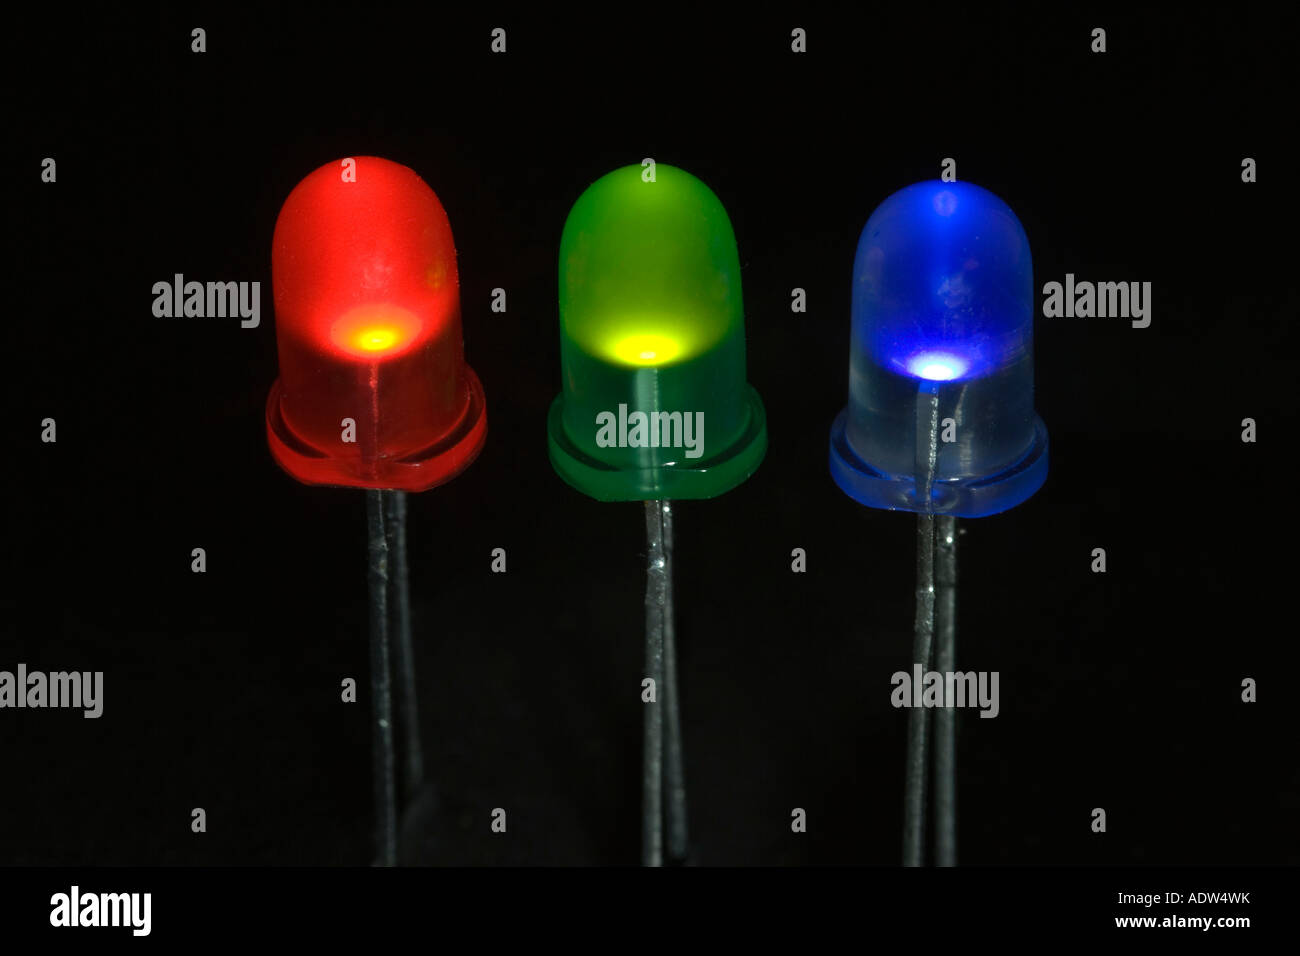 red, green and blue LED 's Stock Photo